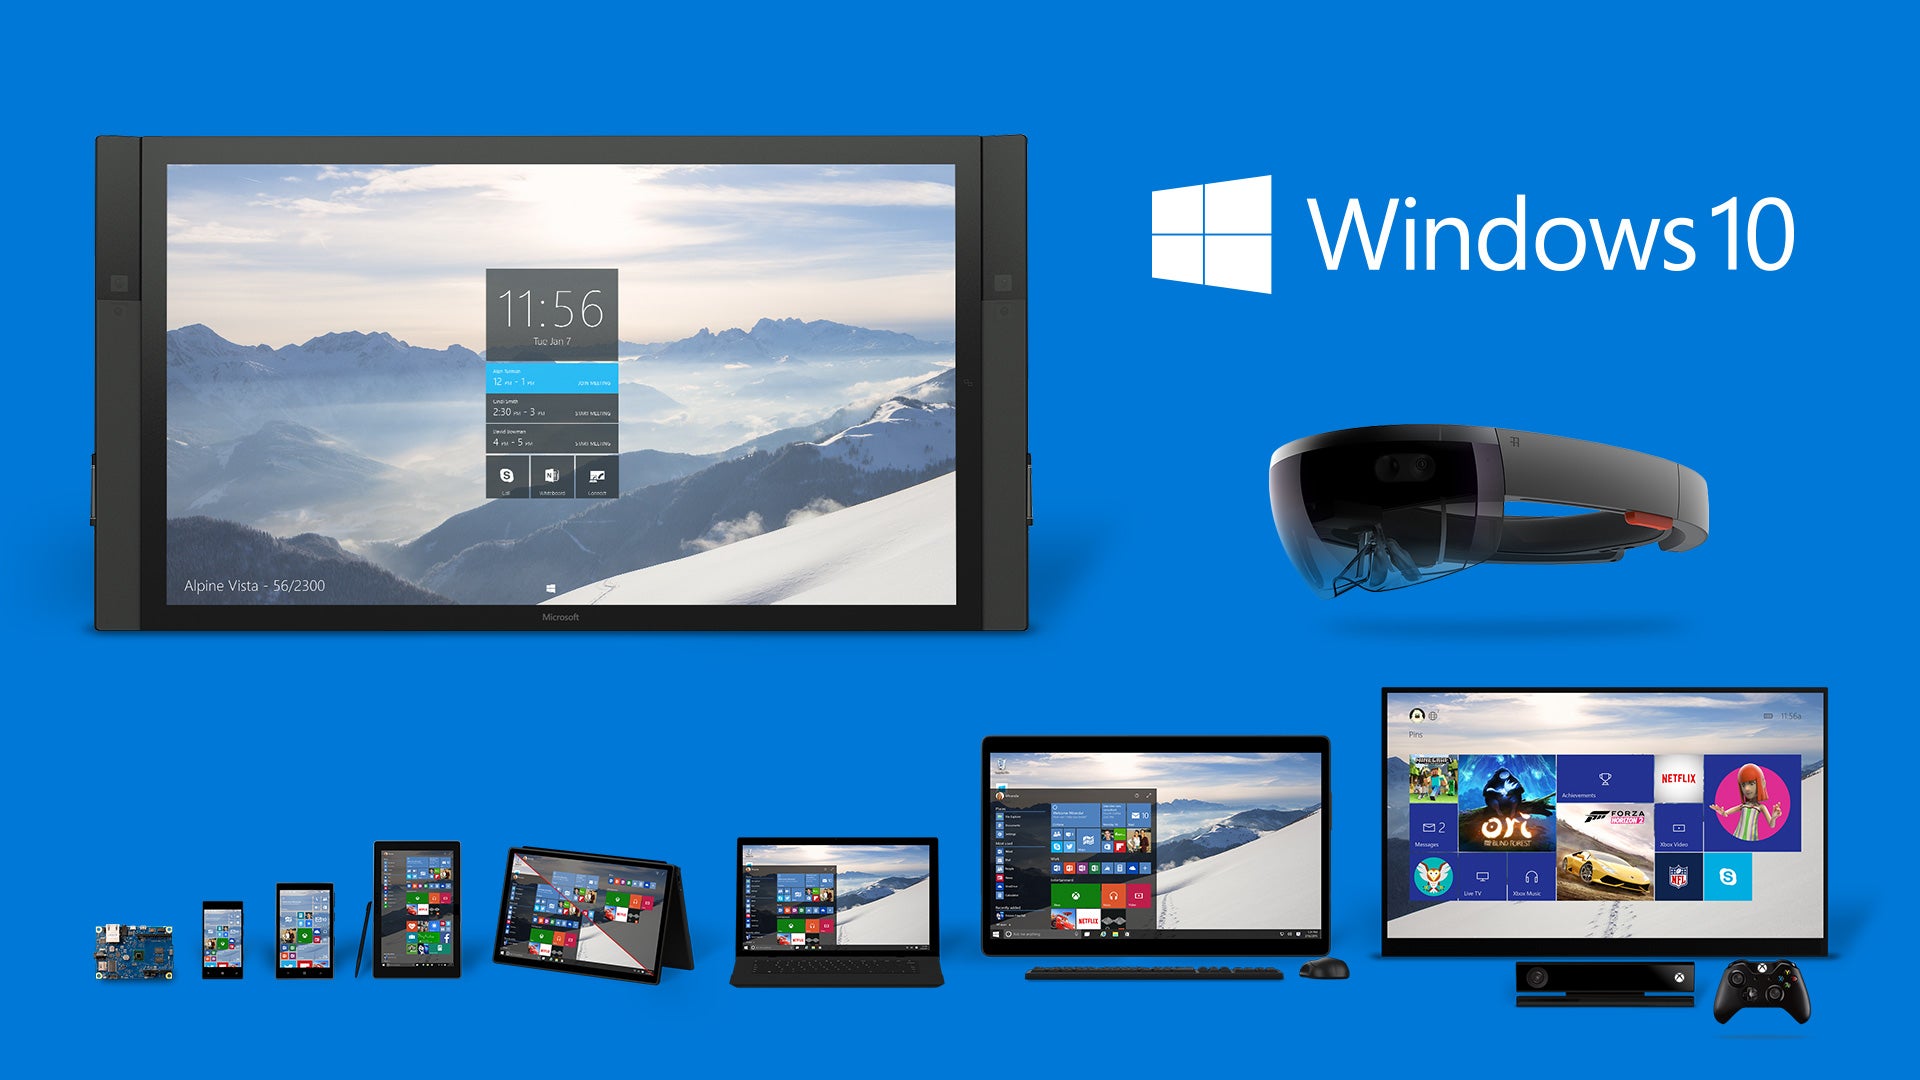 Microsoft will announce new Windows 10 devices at IFA 2015, but the word "smartphone" is strangely missing